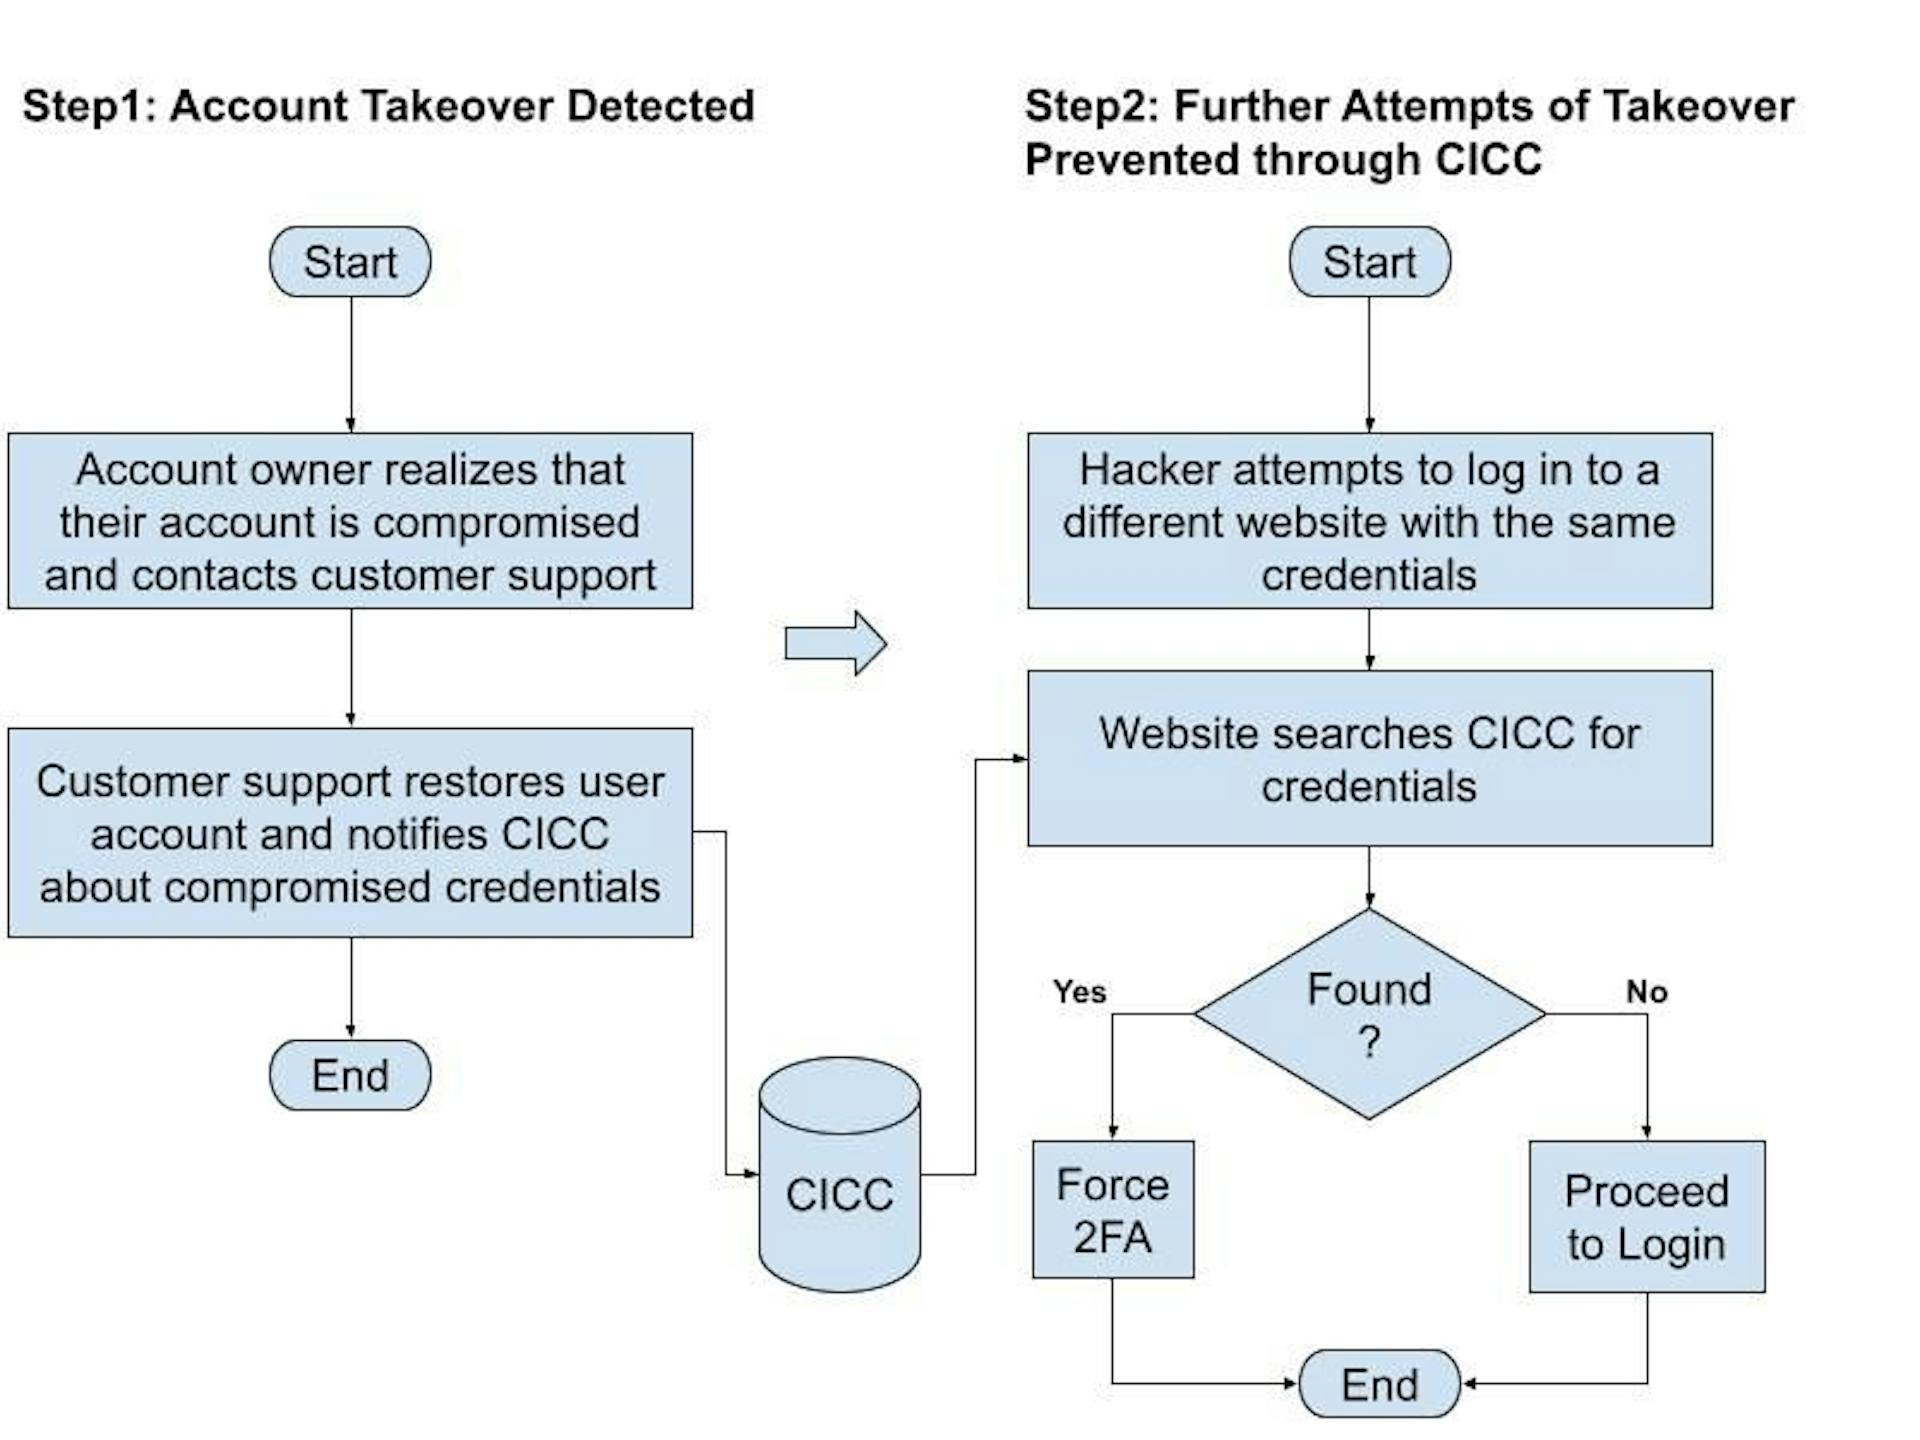 Account Takeover Prevention through shared compromised credentials index